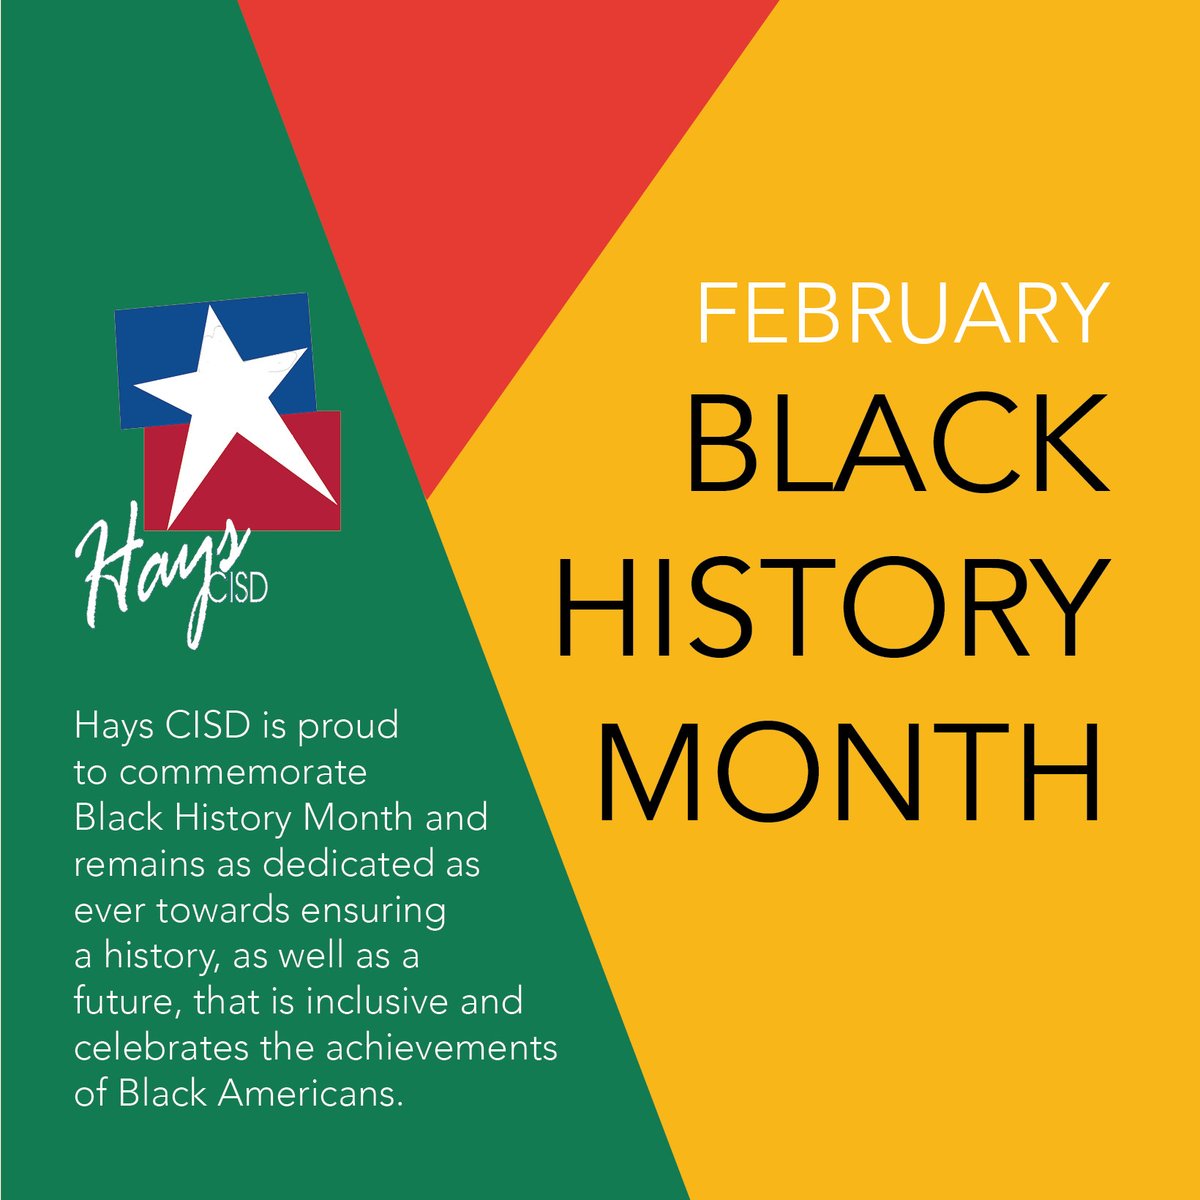 Hays CISD is proud to commemorate Black History Month and remains as dedicated as ever towards ensuring a history, as well as a future, that is inclusive and celebrates the achievements of Black Americans.